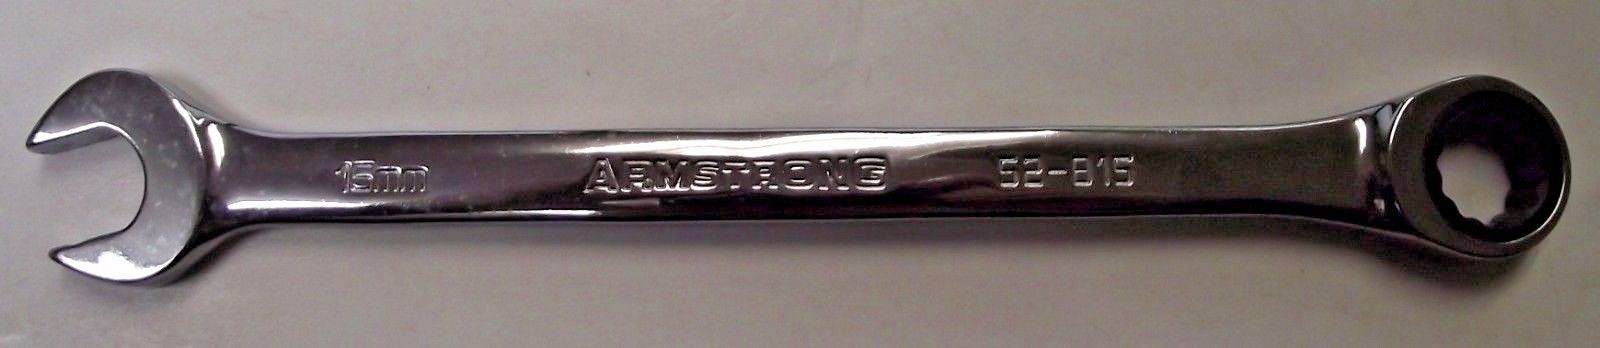 Armstrong 52-815 15mm 12 Point Full Polish Combination Ratcheting Wrench USA